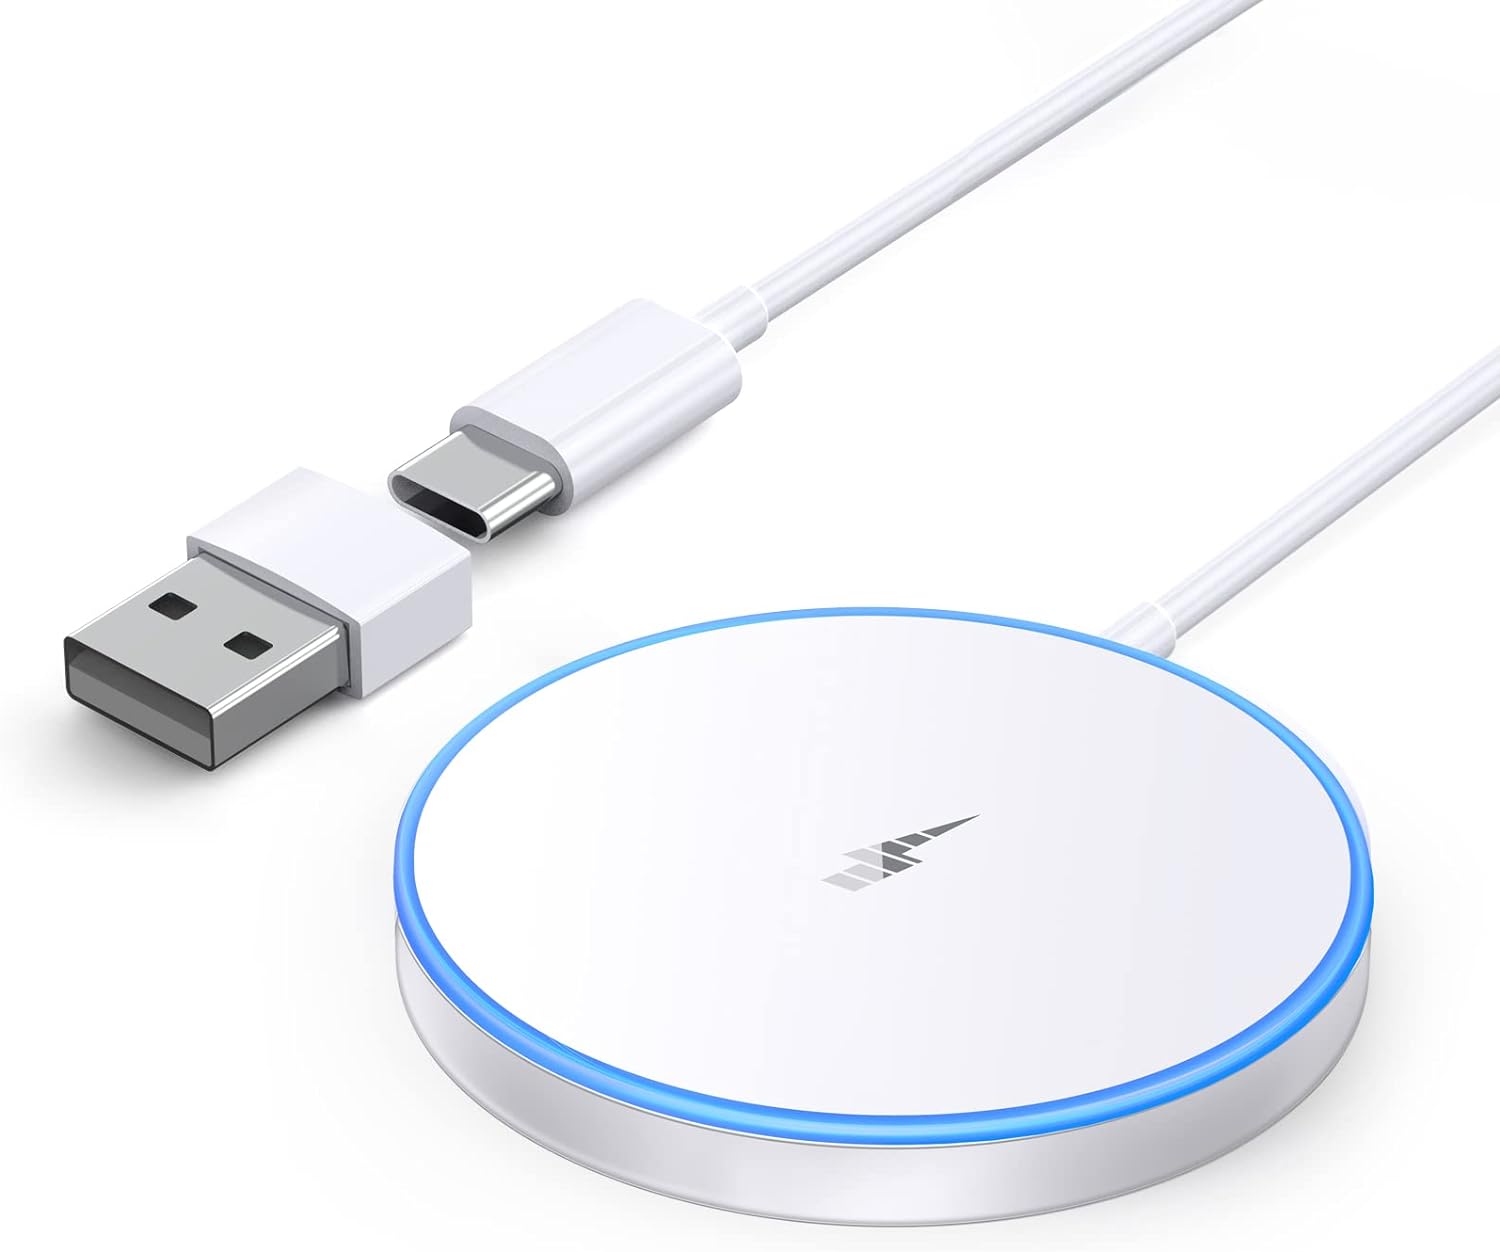 Magnetic Wireless Charger Fast Apple Mag-Safe Charger for iPhone 15 Pro Max/15 Pro/15/15 Plus/14/13/12 Series AirPods 3/2/Pro/Pro 2 LED Magnet Charging Pad Mag Safe Charger with Dual Charging Ports